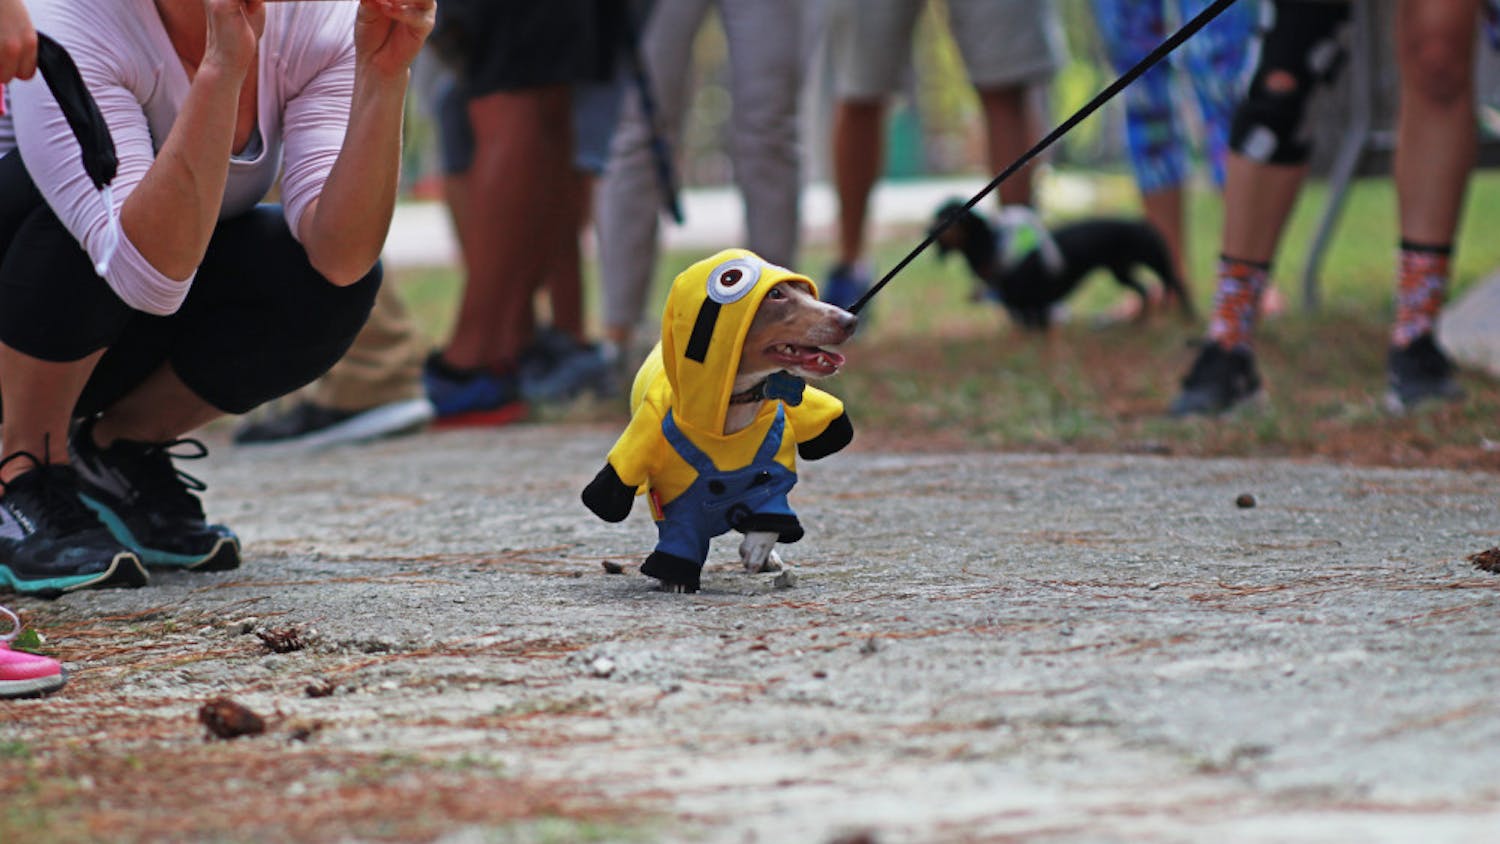 Tracker, a miniature dachshund, struts down the runway dressed as a minion from the movie series “Despicable Me.” Tracker won second place in the costume contest that was held after the races.